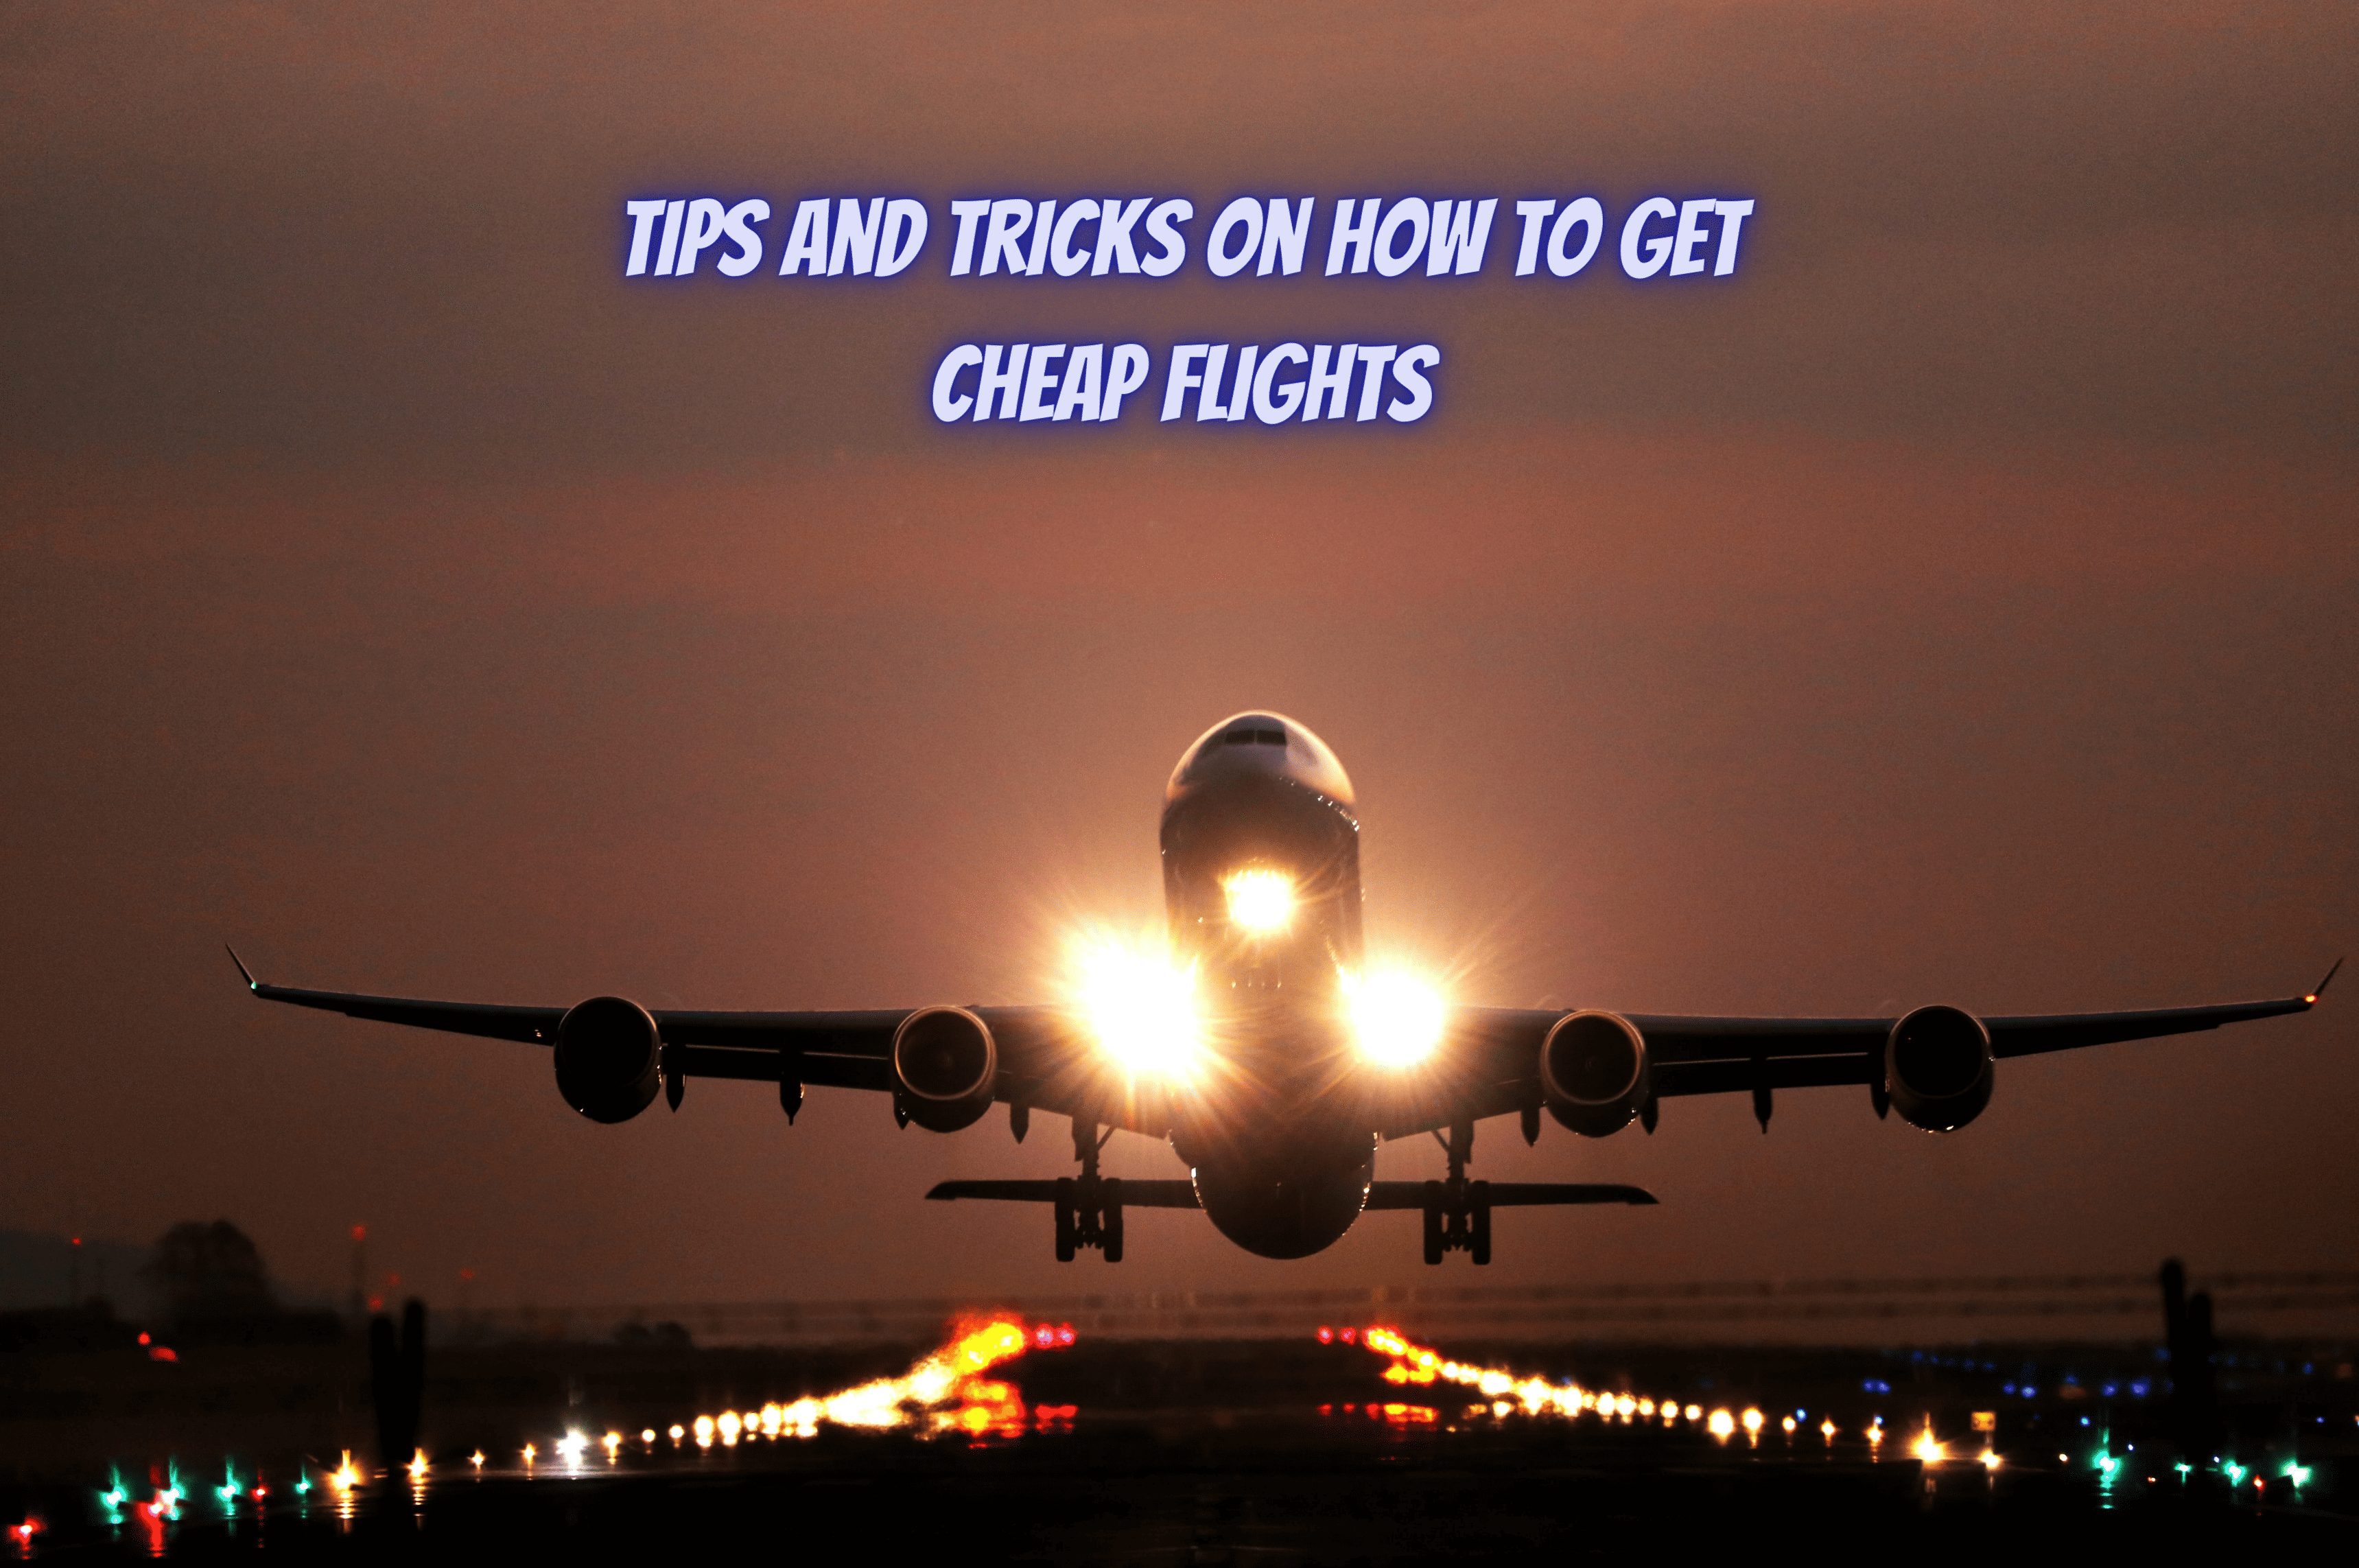 15 Great Tips and Tricks on How to Get Affordable and Cheap Flights